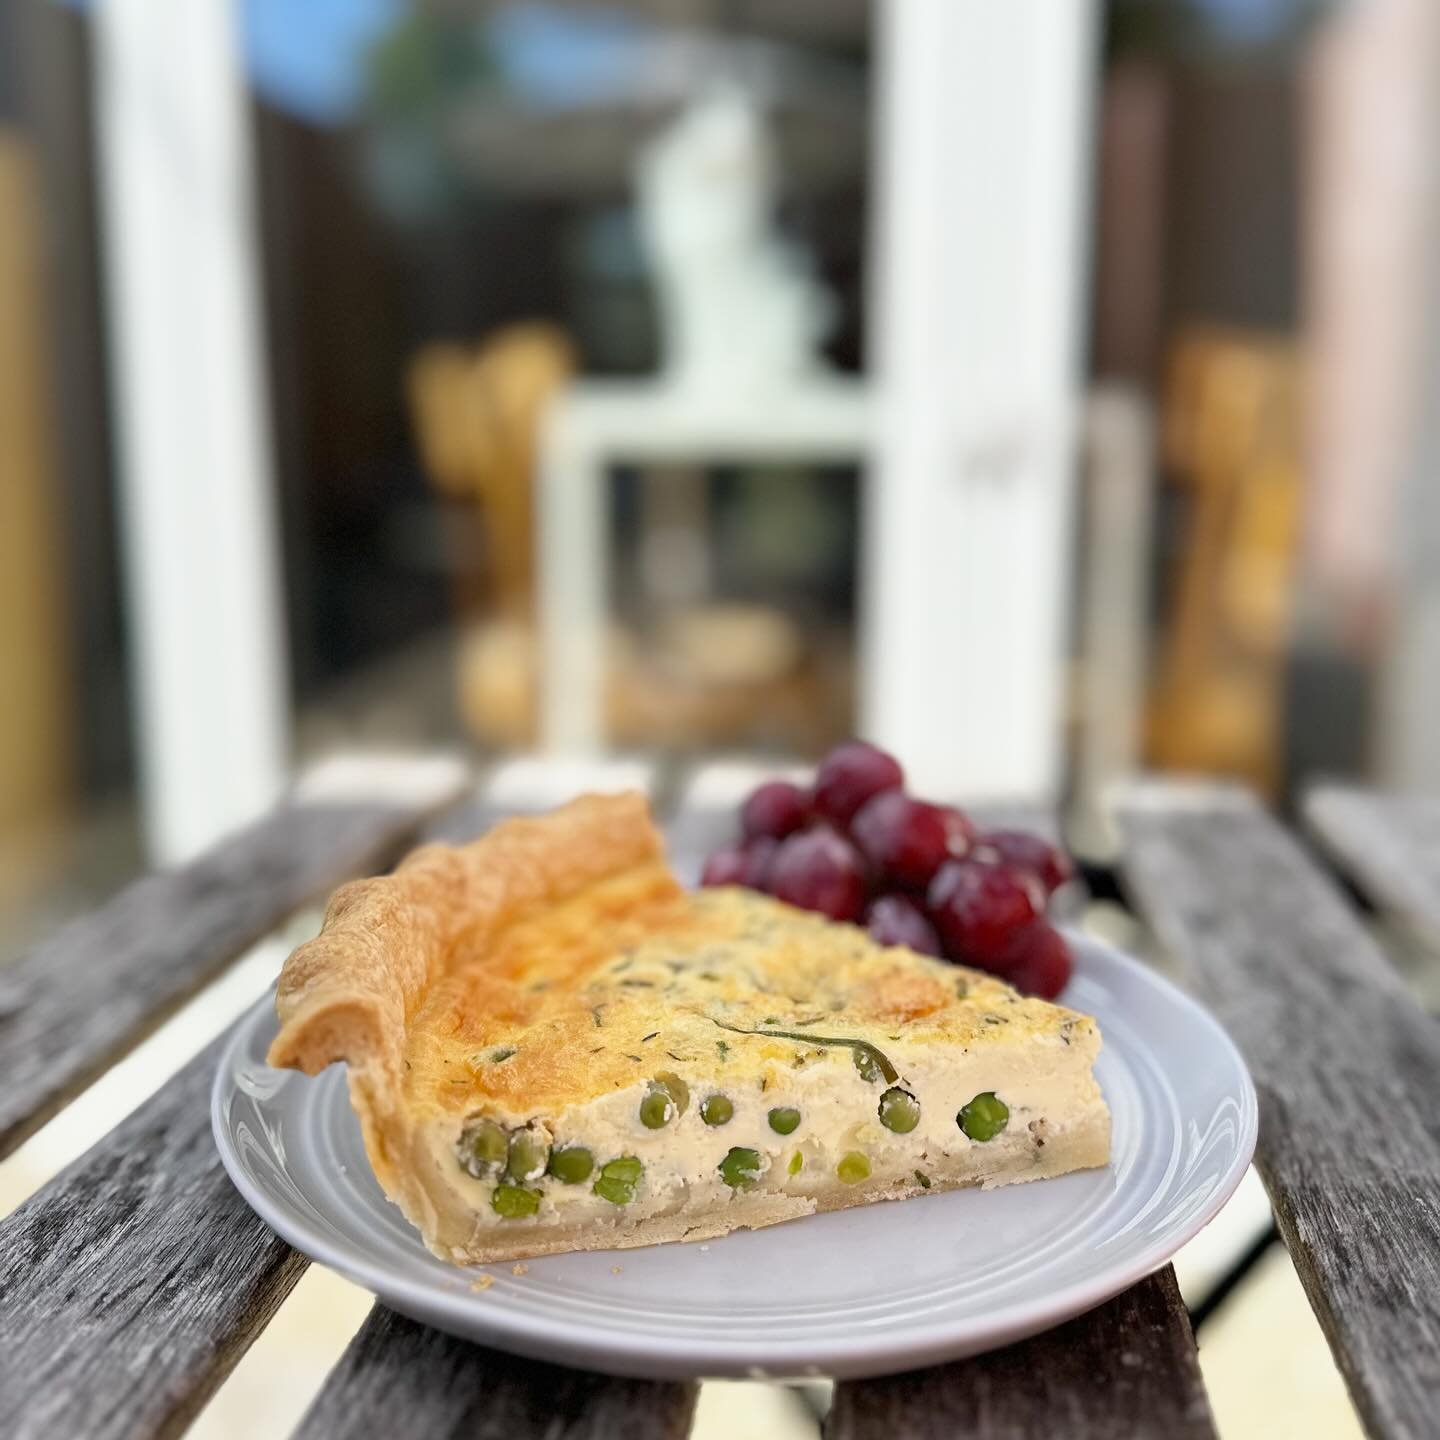 Quiche of the day is spring pea with Parmesan and thyme. It&rsquo;s a perfect day for catio dining! 🥧🫛🧀🌱 #buckminsterscatcafe #quicheoftheday #lunchwithcats #catiodining